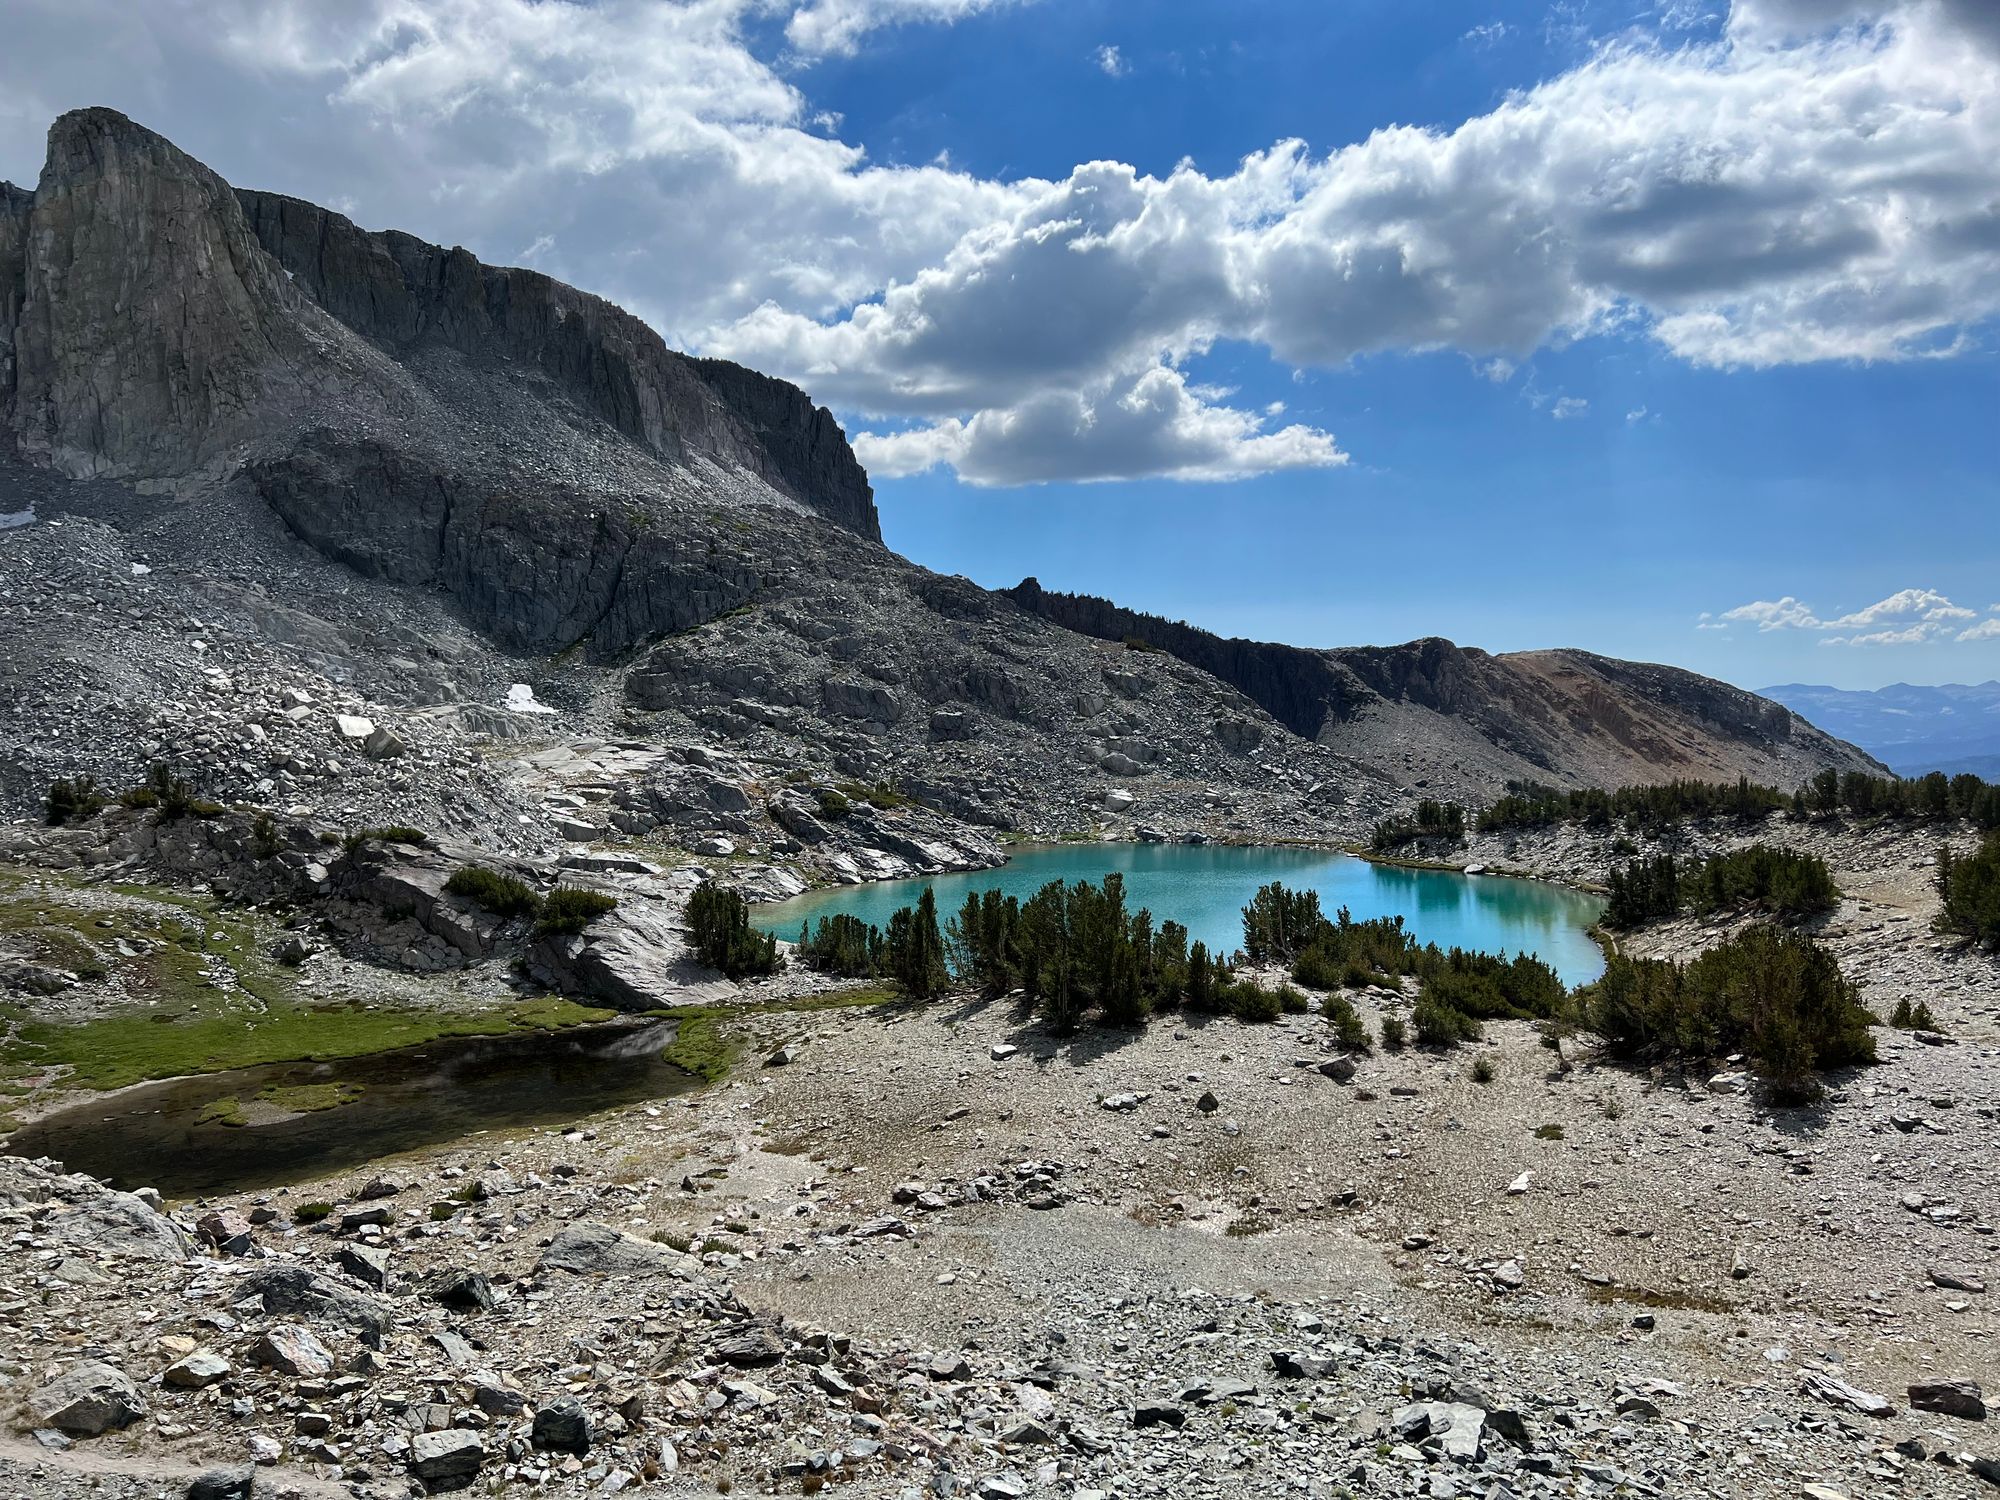 A turquoise lake surrounded by gray talus and pine trees.